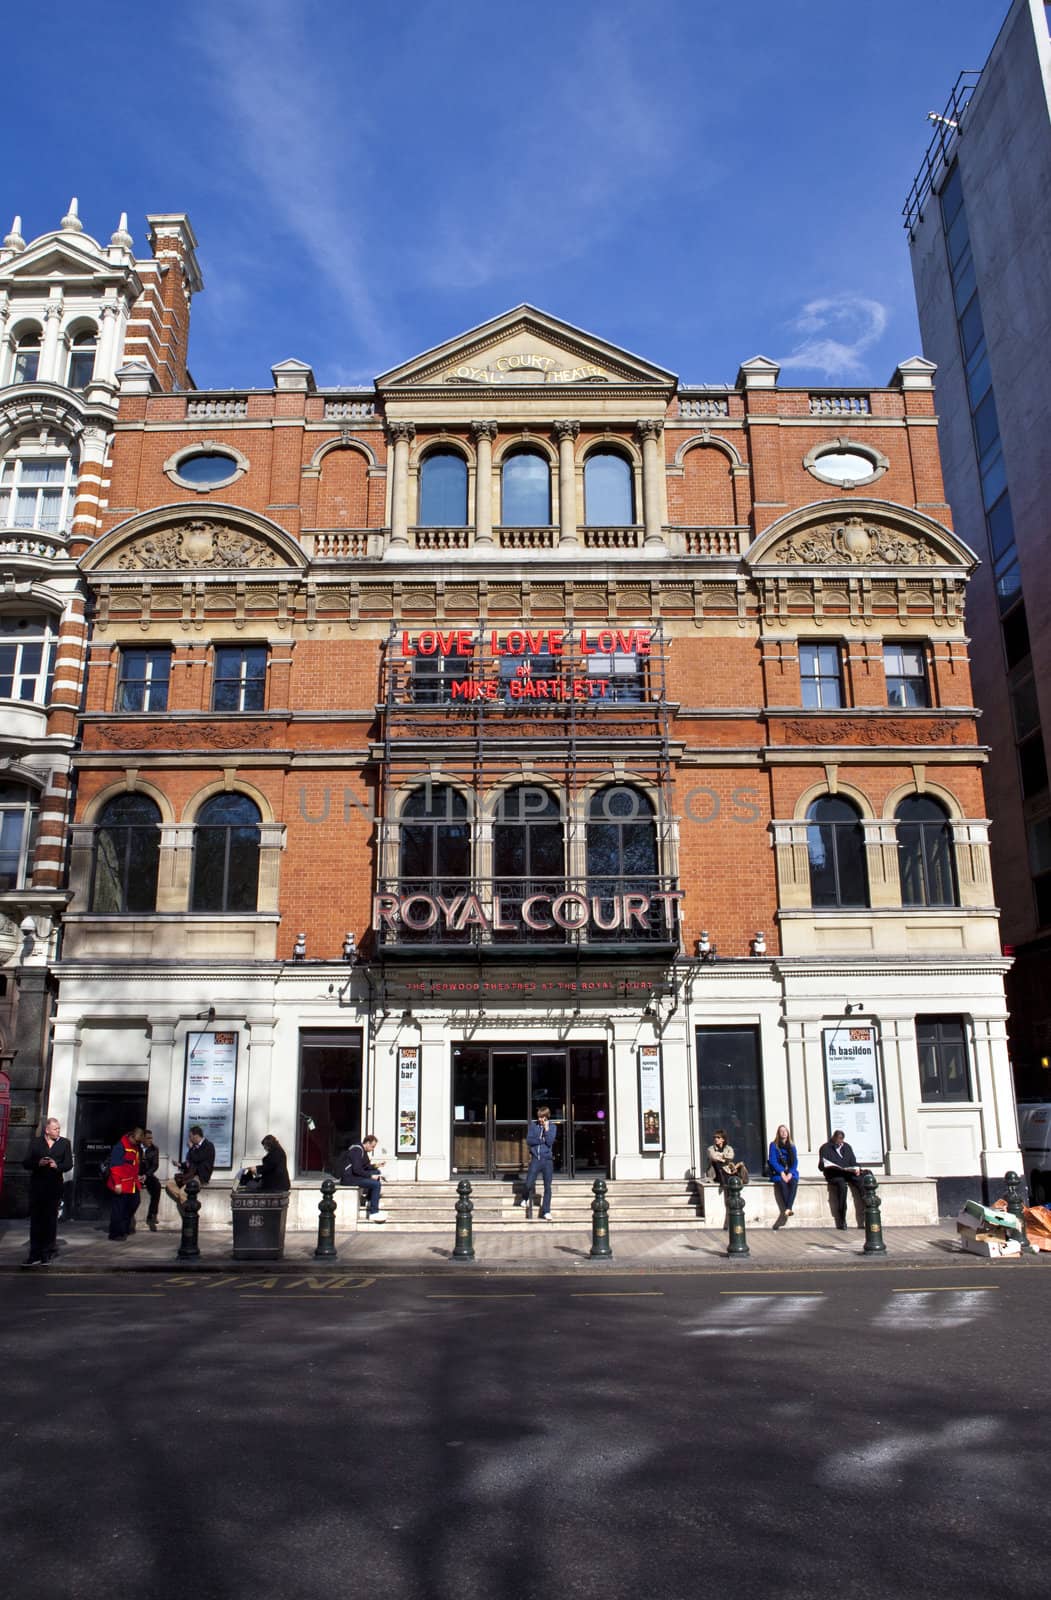 The Royal Court Theatre located in Sloane Square, London.